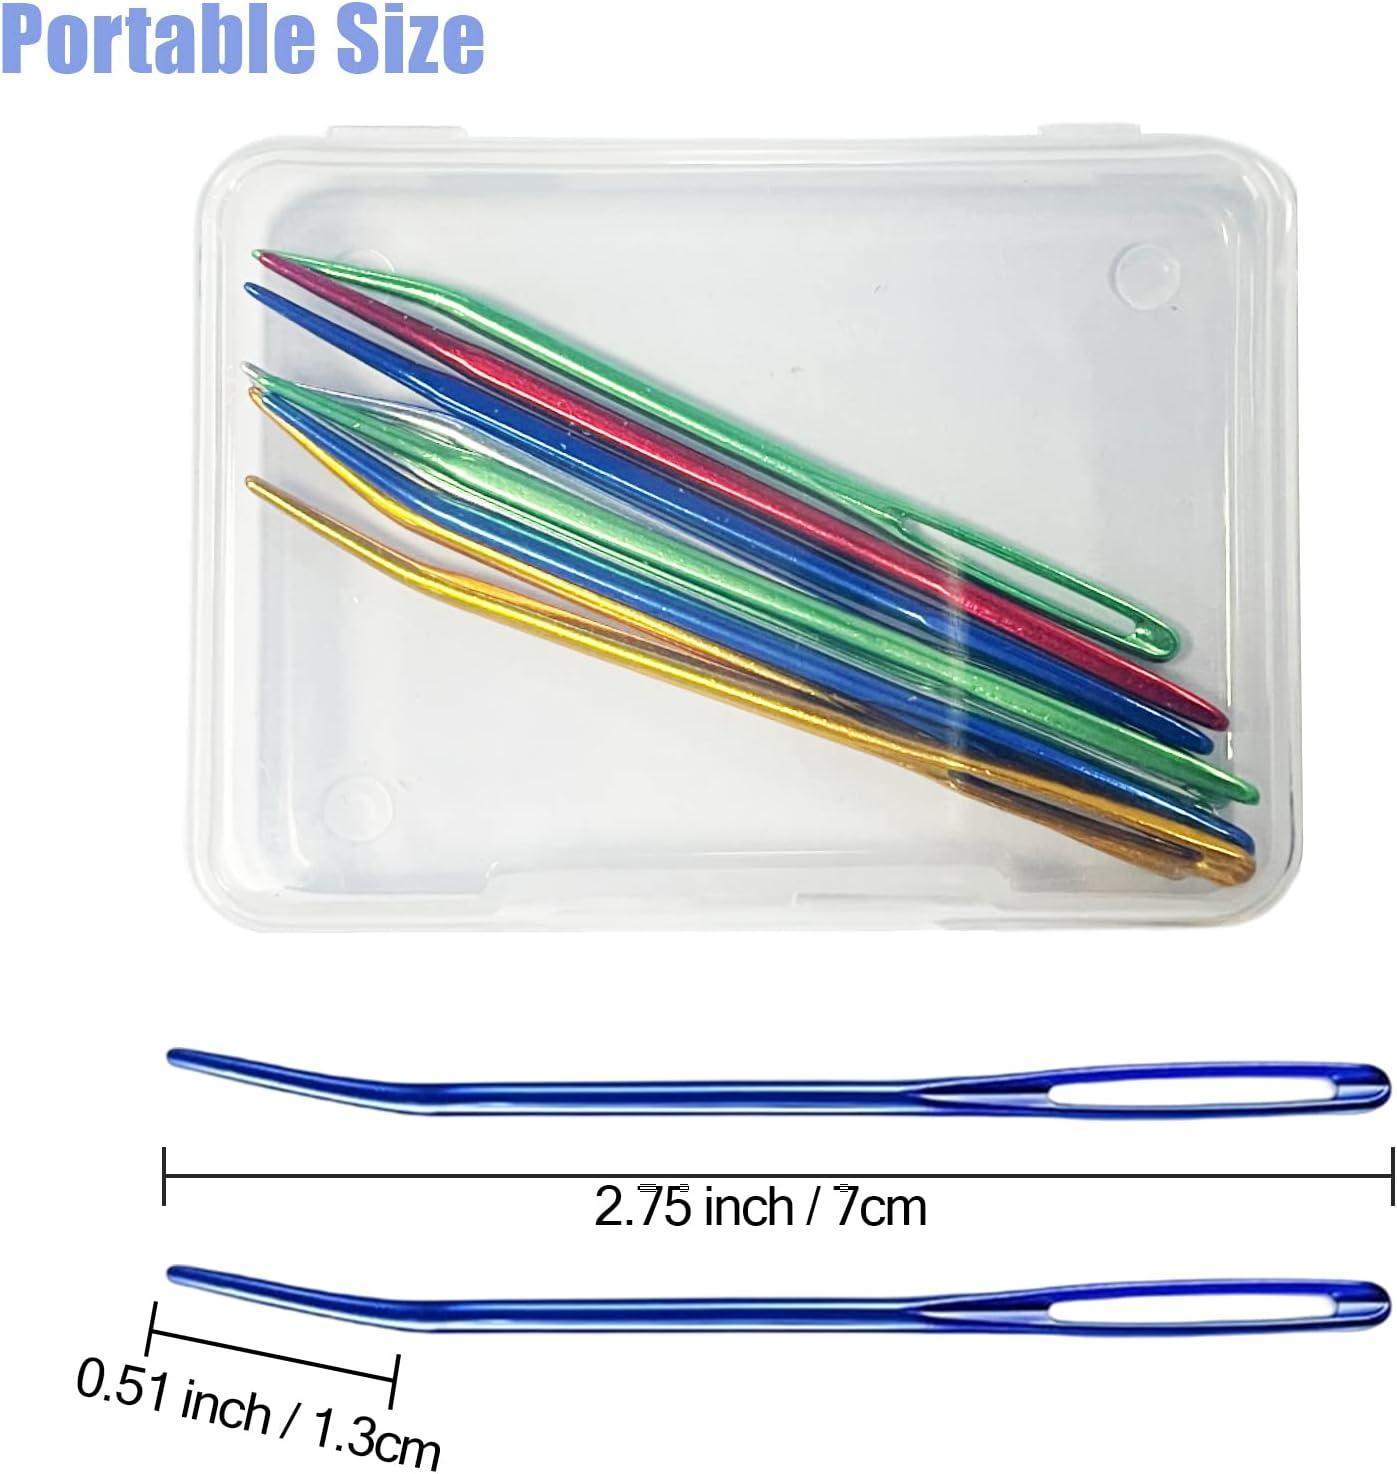 Sewing Knitting Large Eye Blunt Yarn Needles, Weaving Needles Knitting  Crochet Stitch Needles, Suitable For Crochet Project